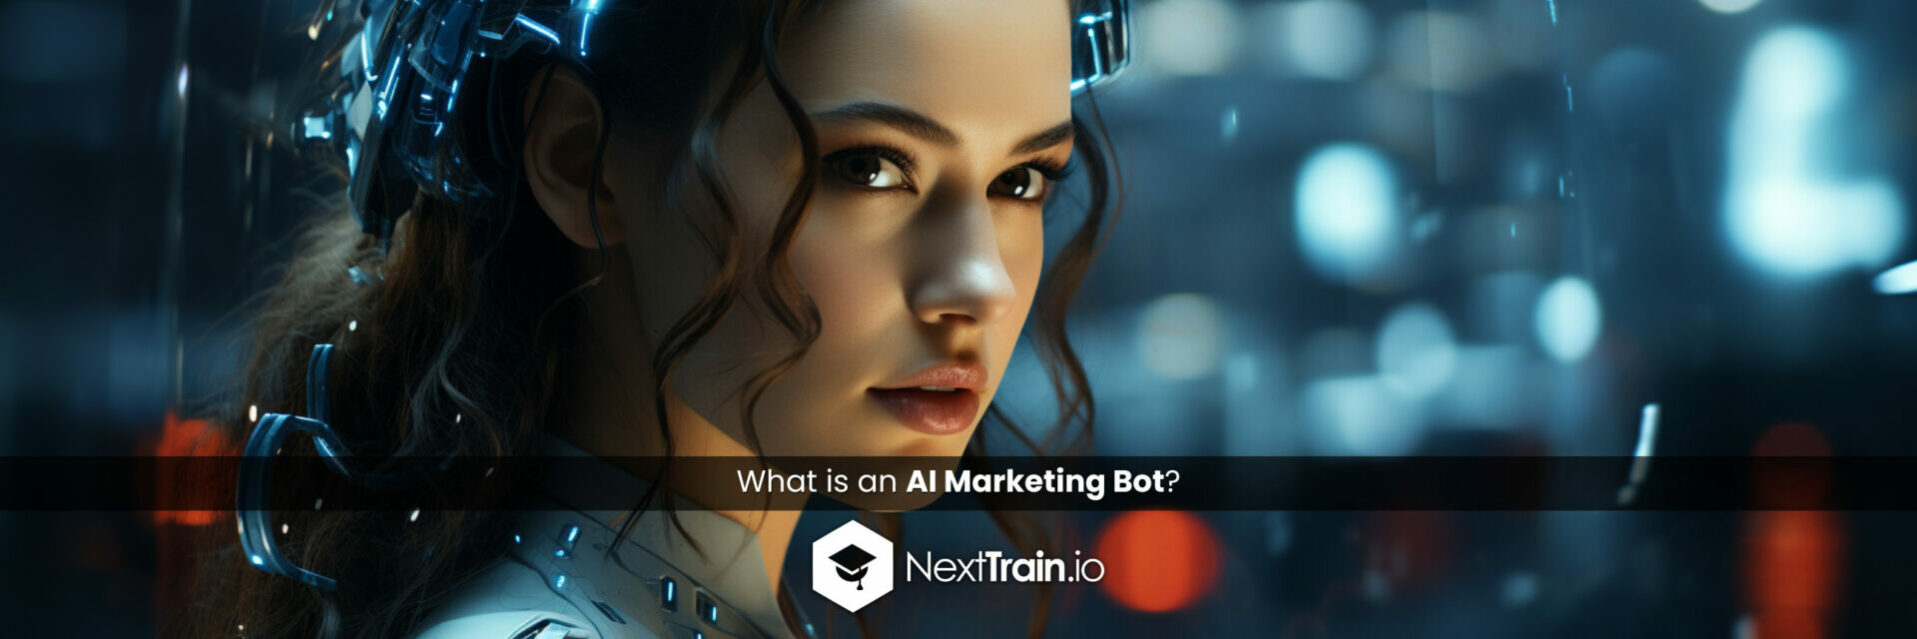 What is an AI Marketing Bot?